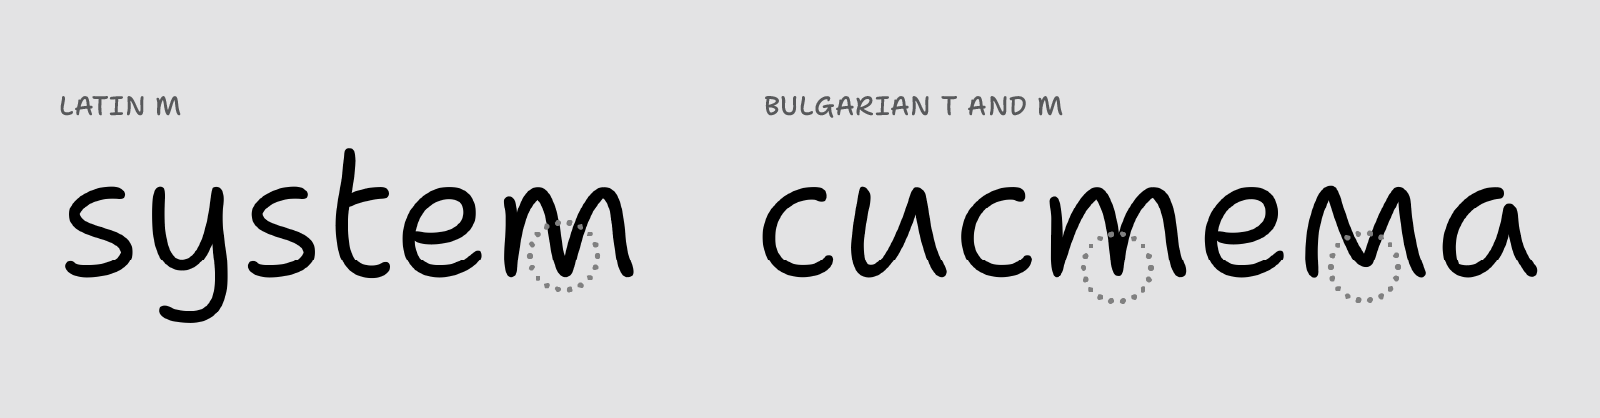 Bulgarian “т” and “м” versus the “m” in Latin